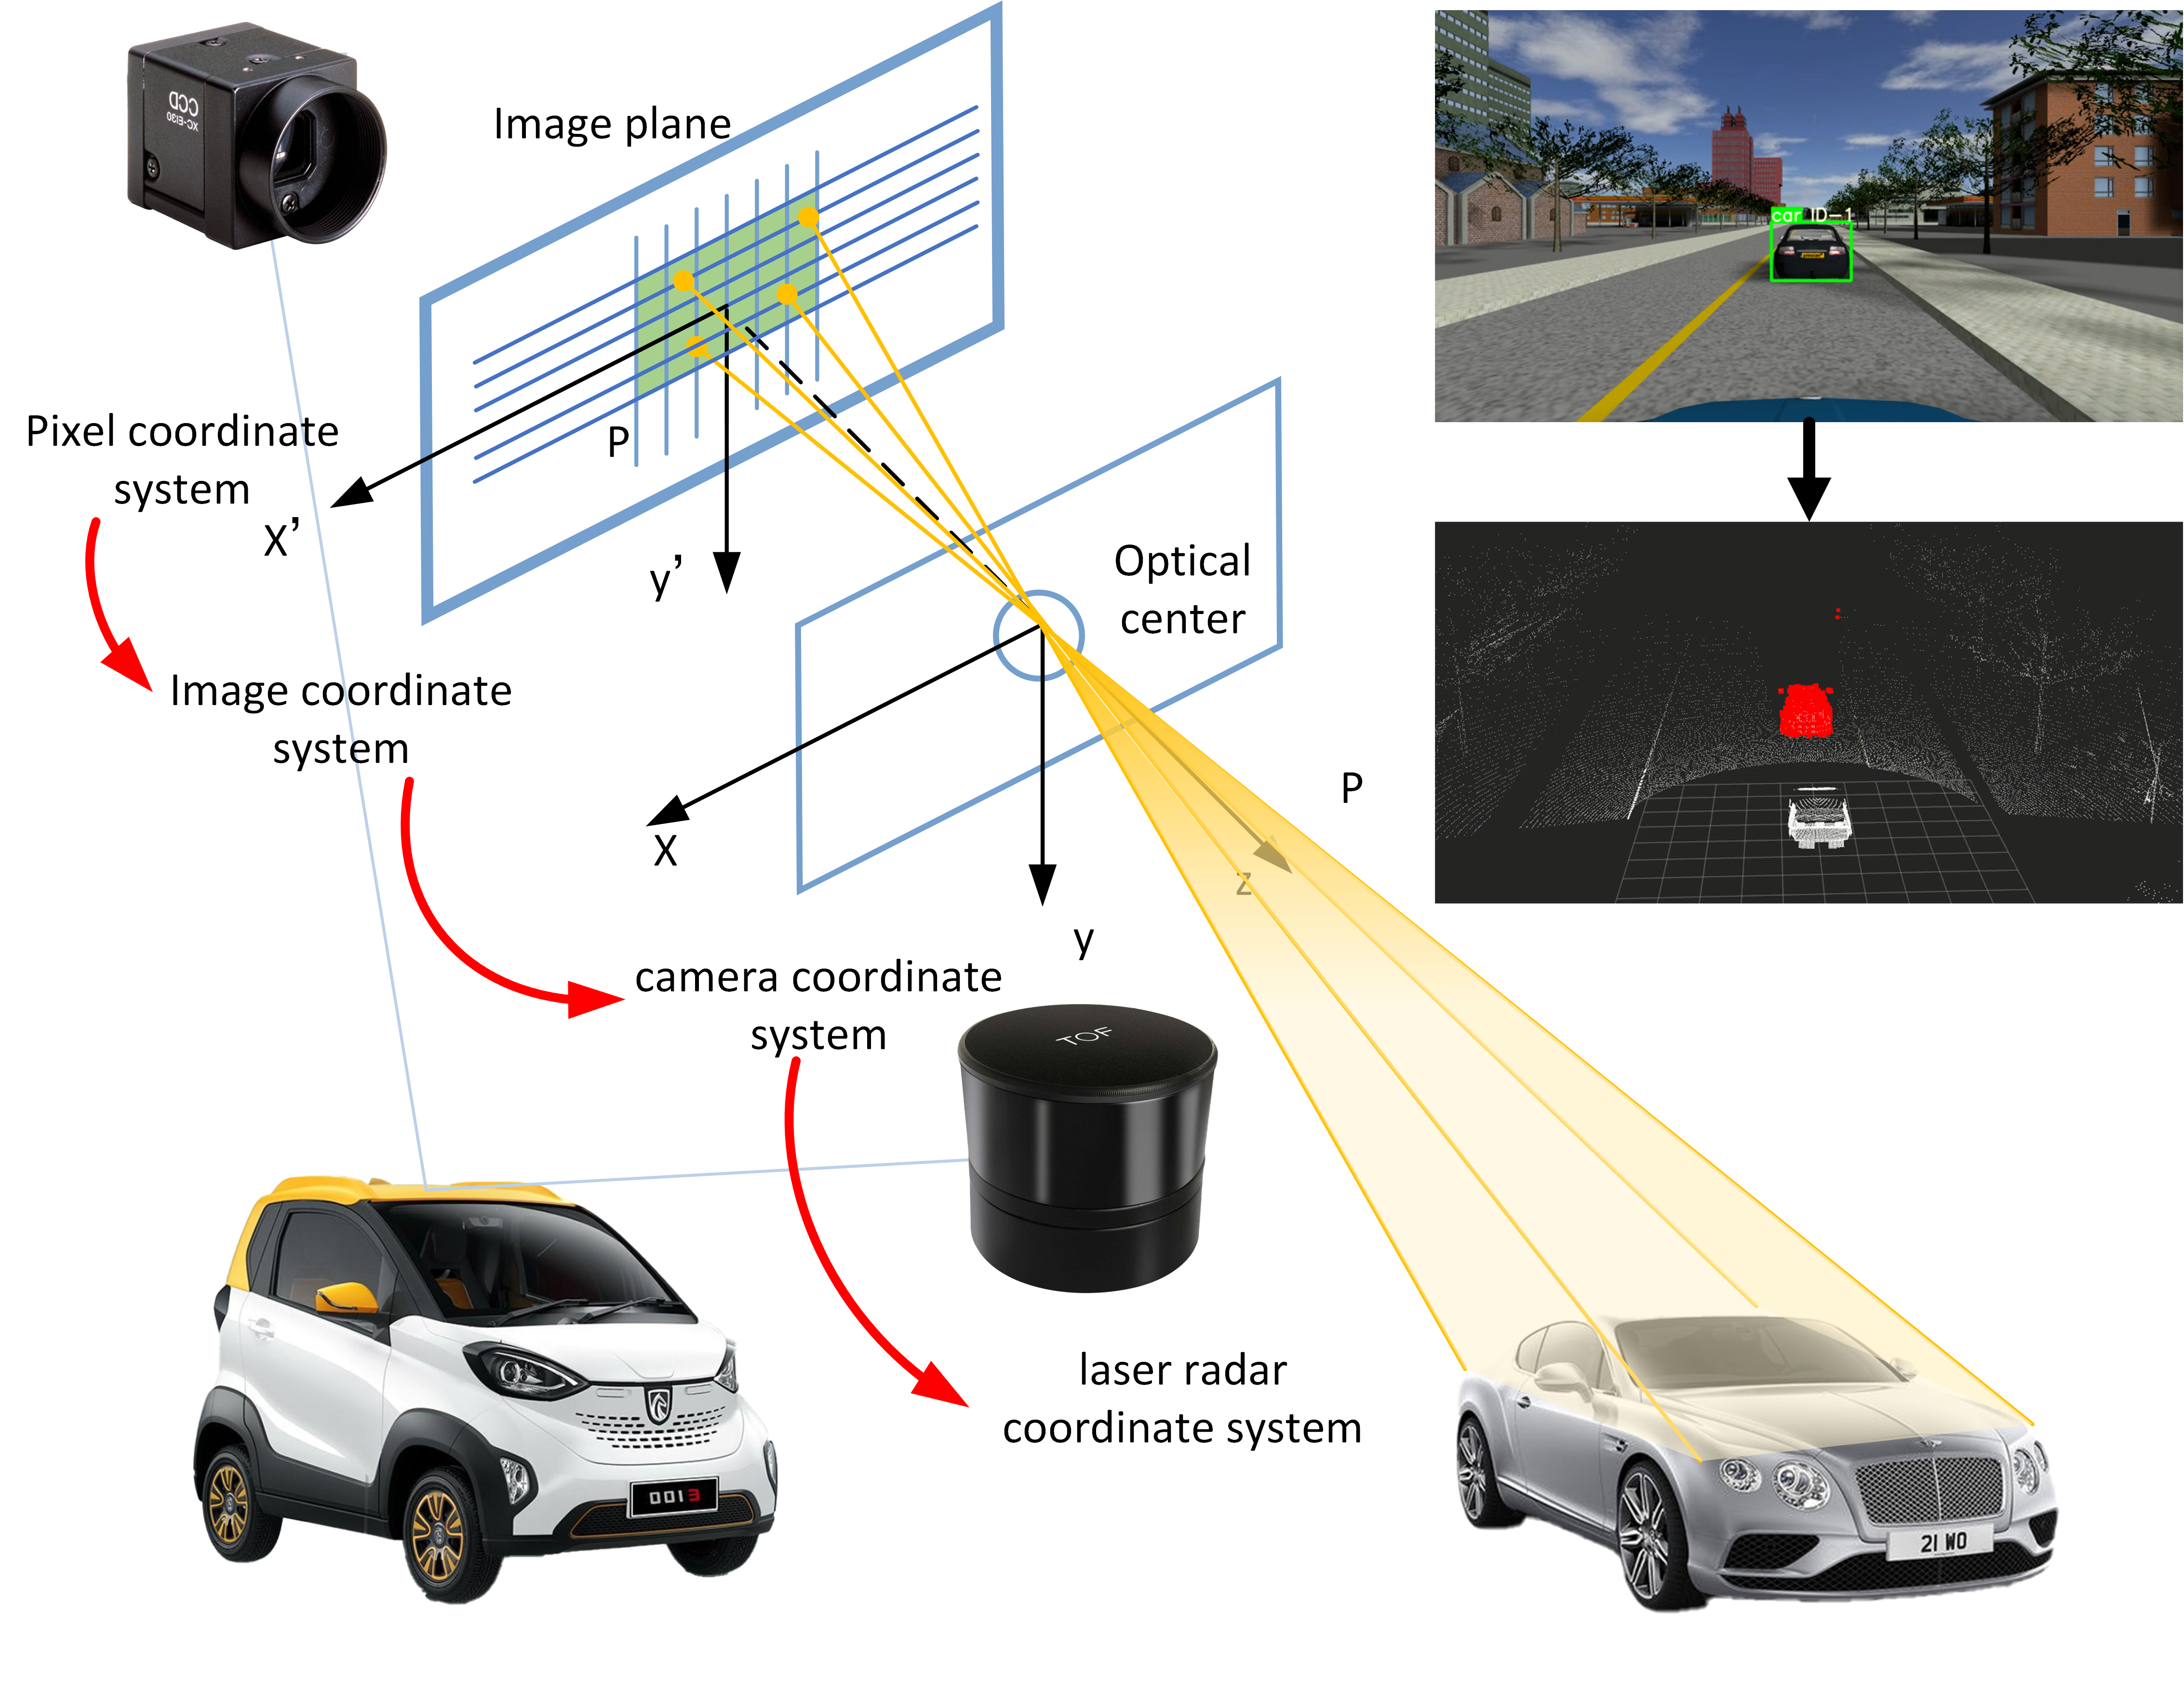 Fig. 4 Target detection and LiDAR data fusion